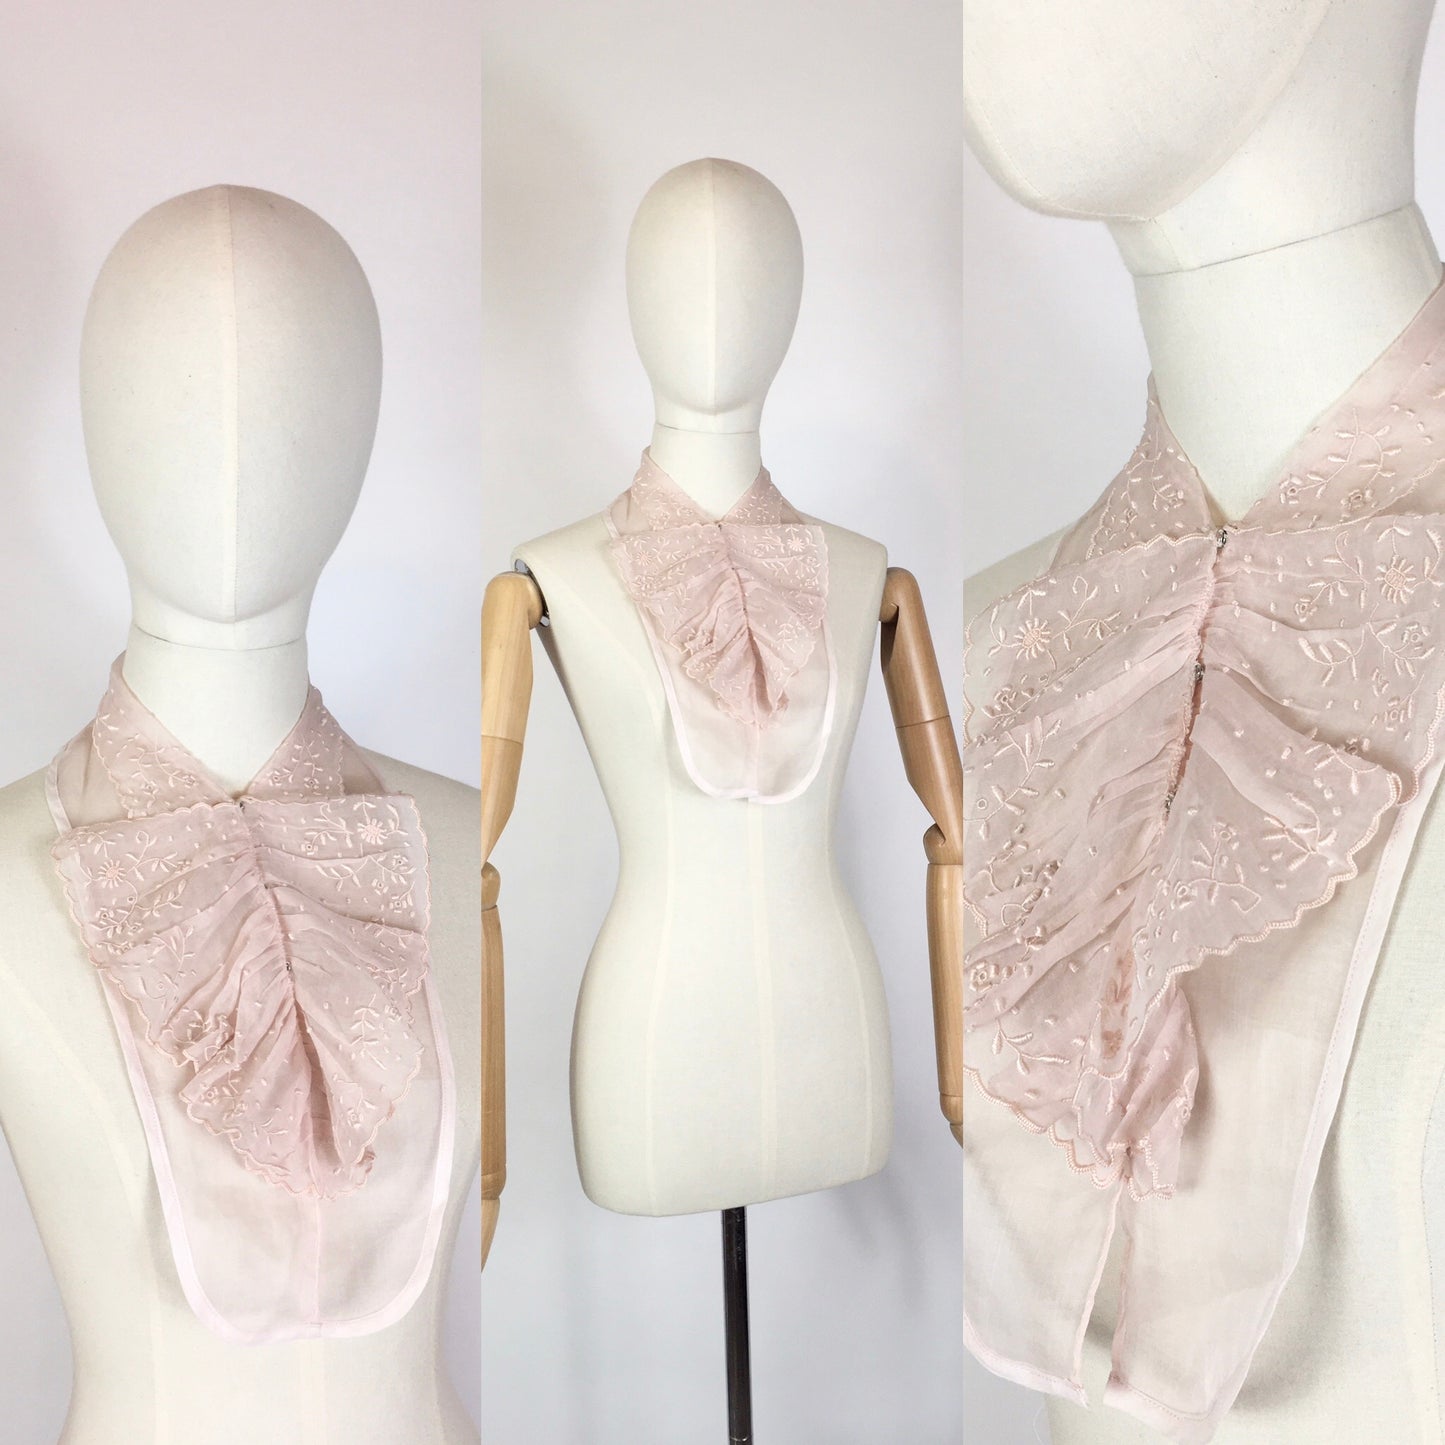 Original 1930’s Broderie Anglaise Dickie - By Saks Fifth Avenue in A Powdered Pink